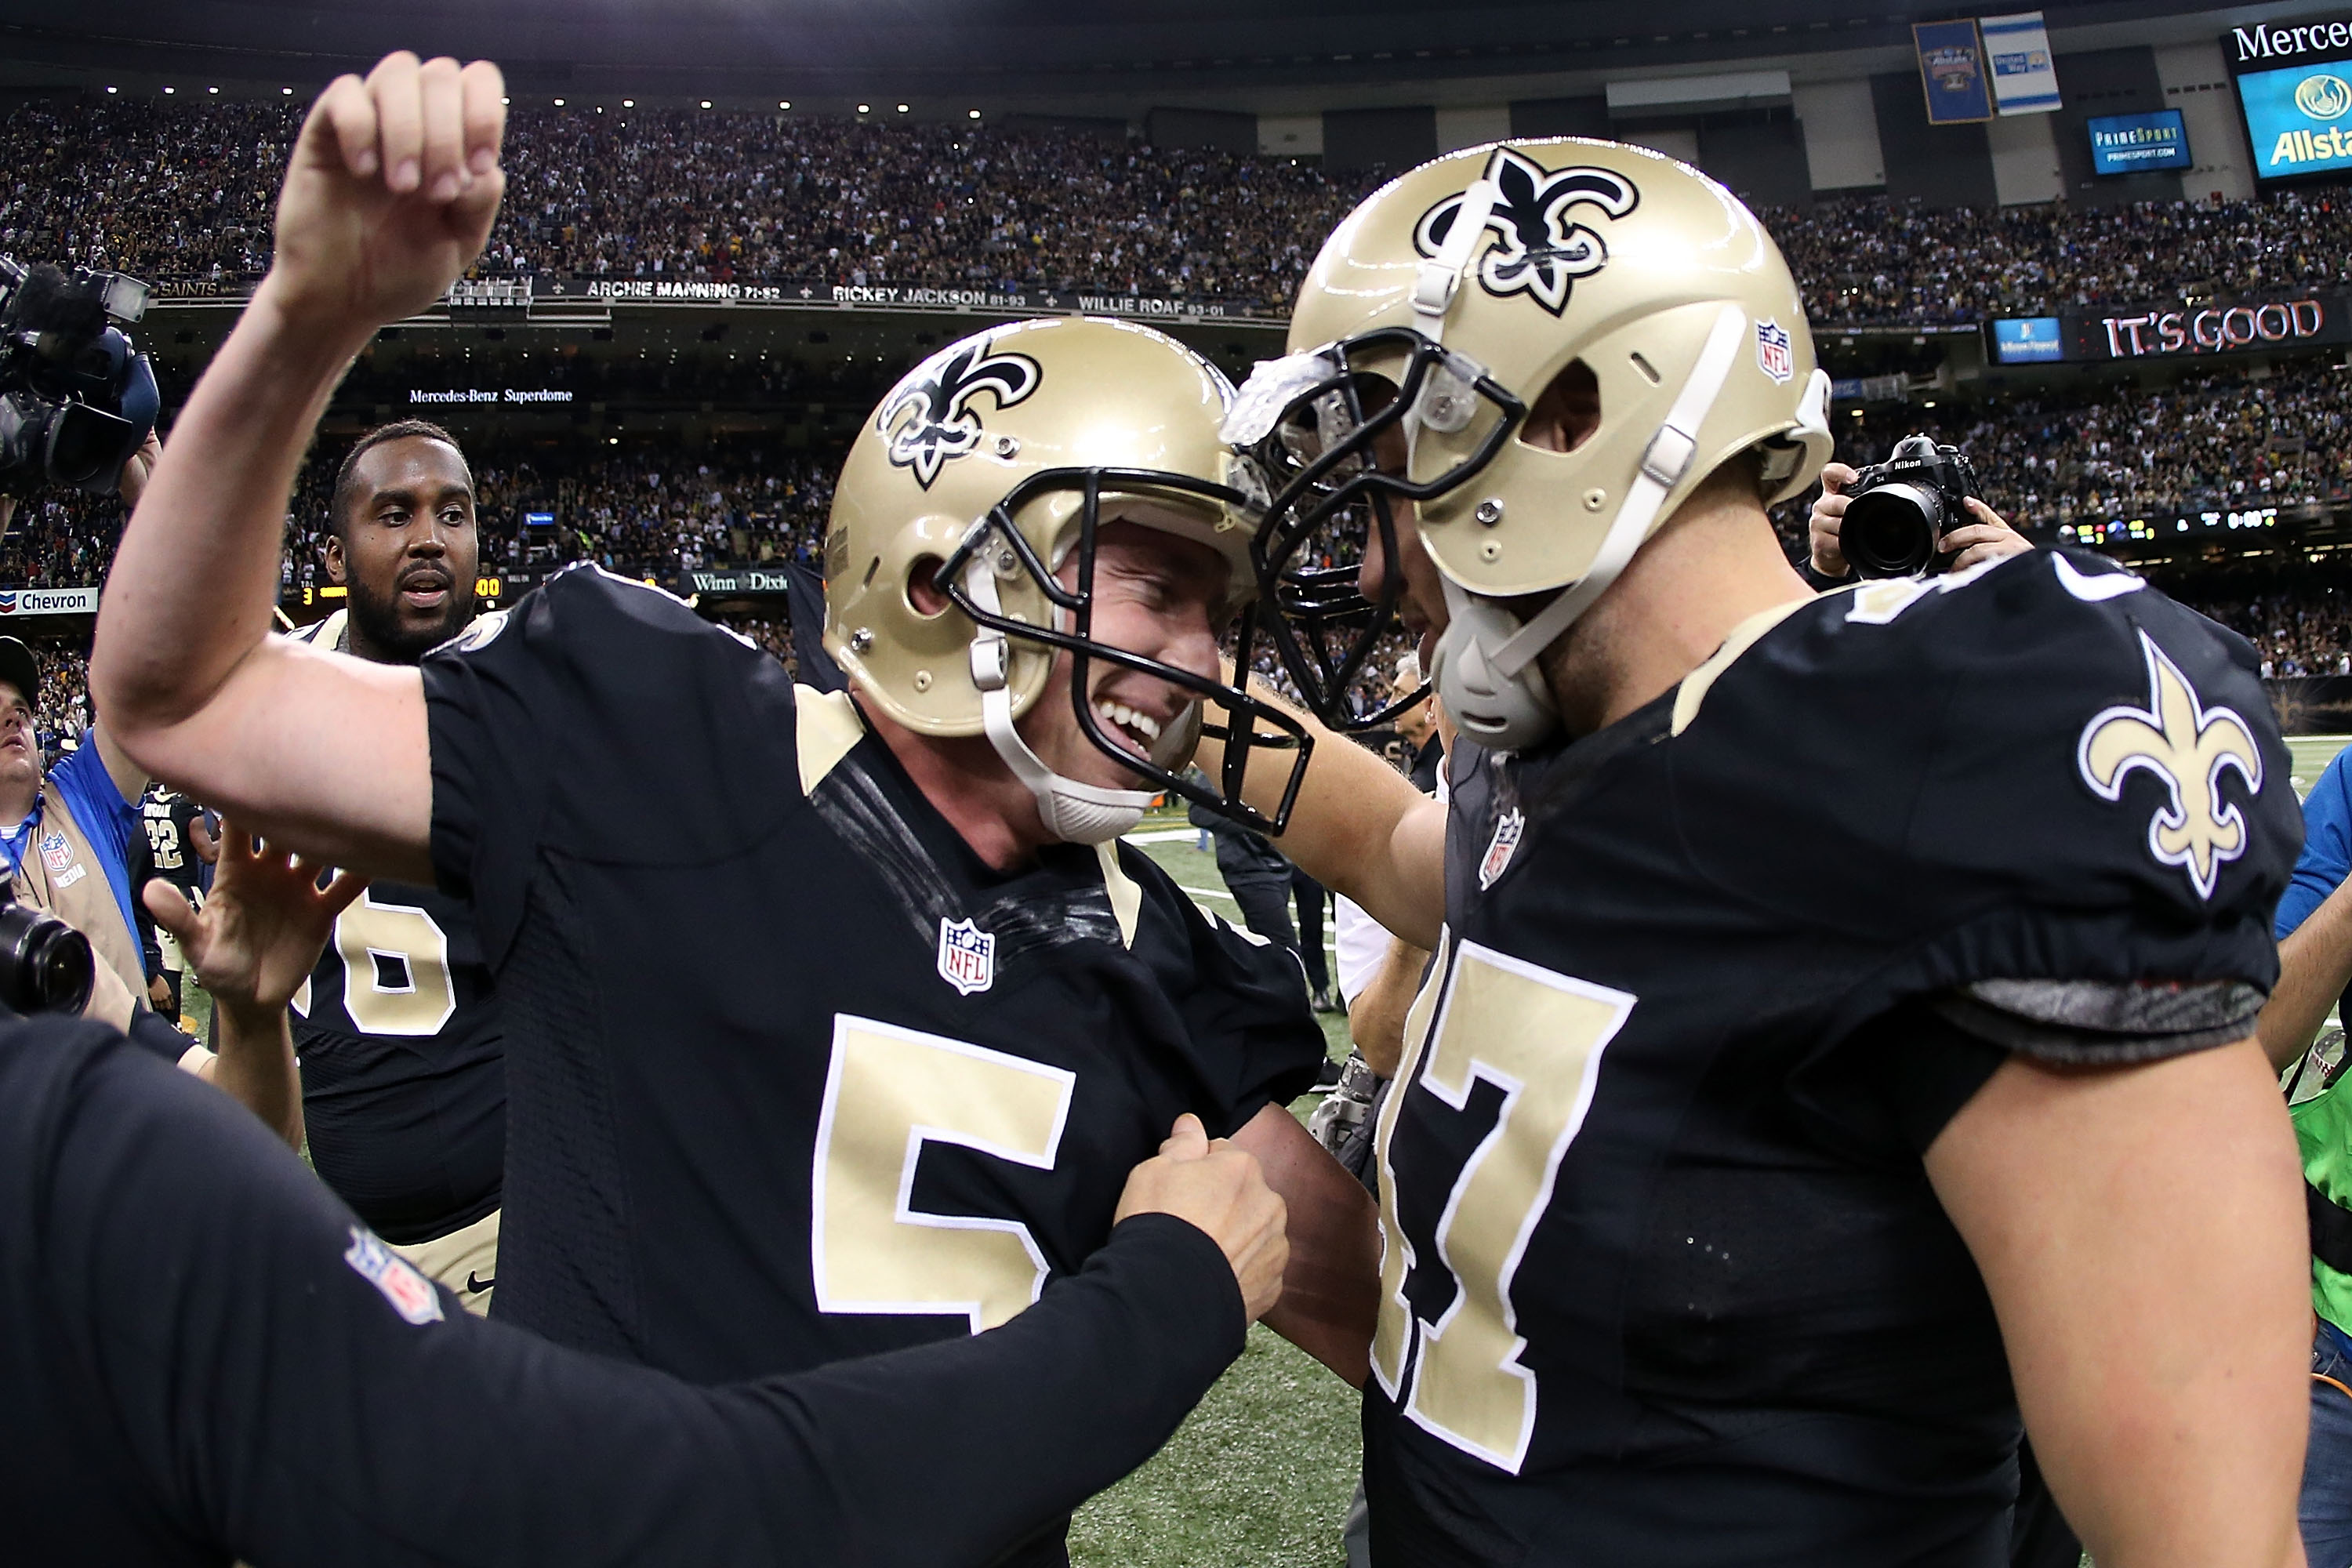 Kai Forbath's game-winning field goal ended one of the NFL's highest-scoring games. (Getty)